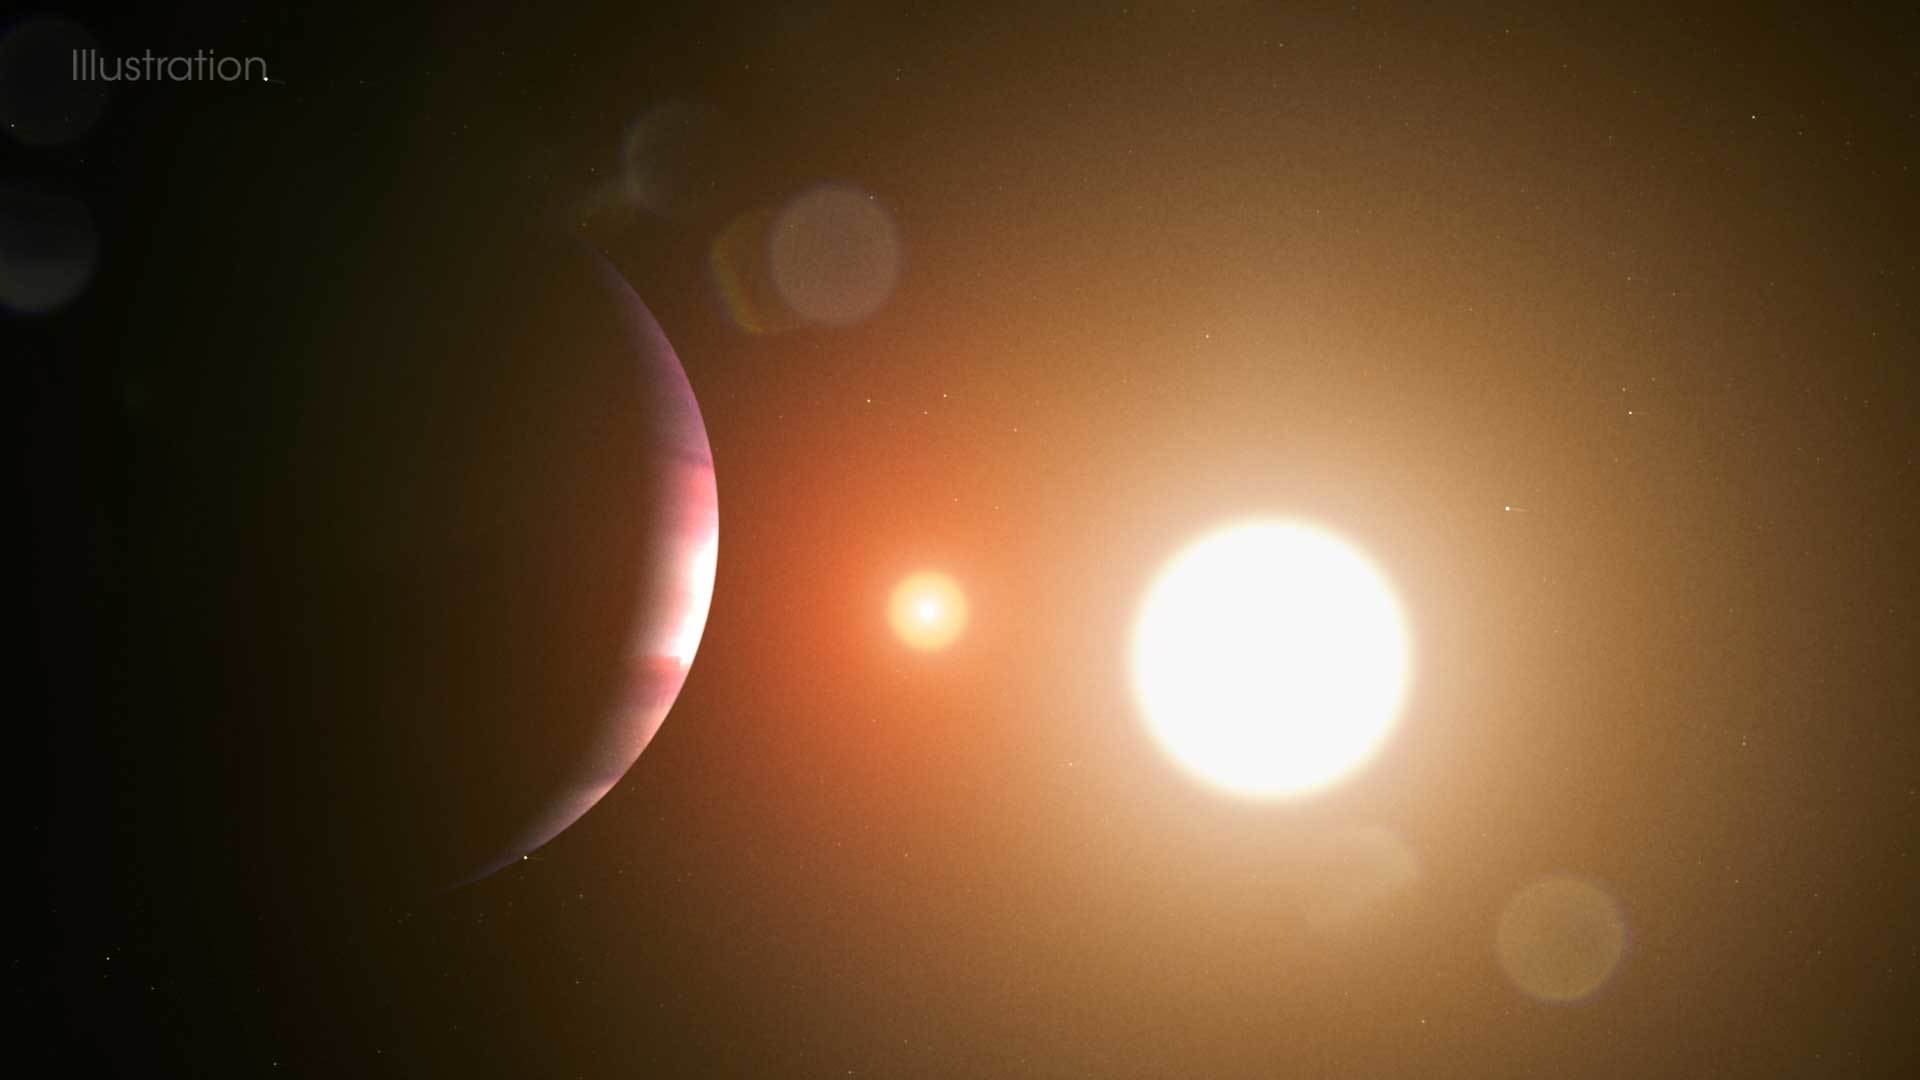 A large exoplanet is seen in an artist's illustration orbiting two stars.